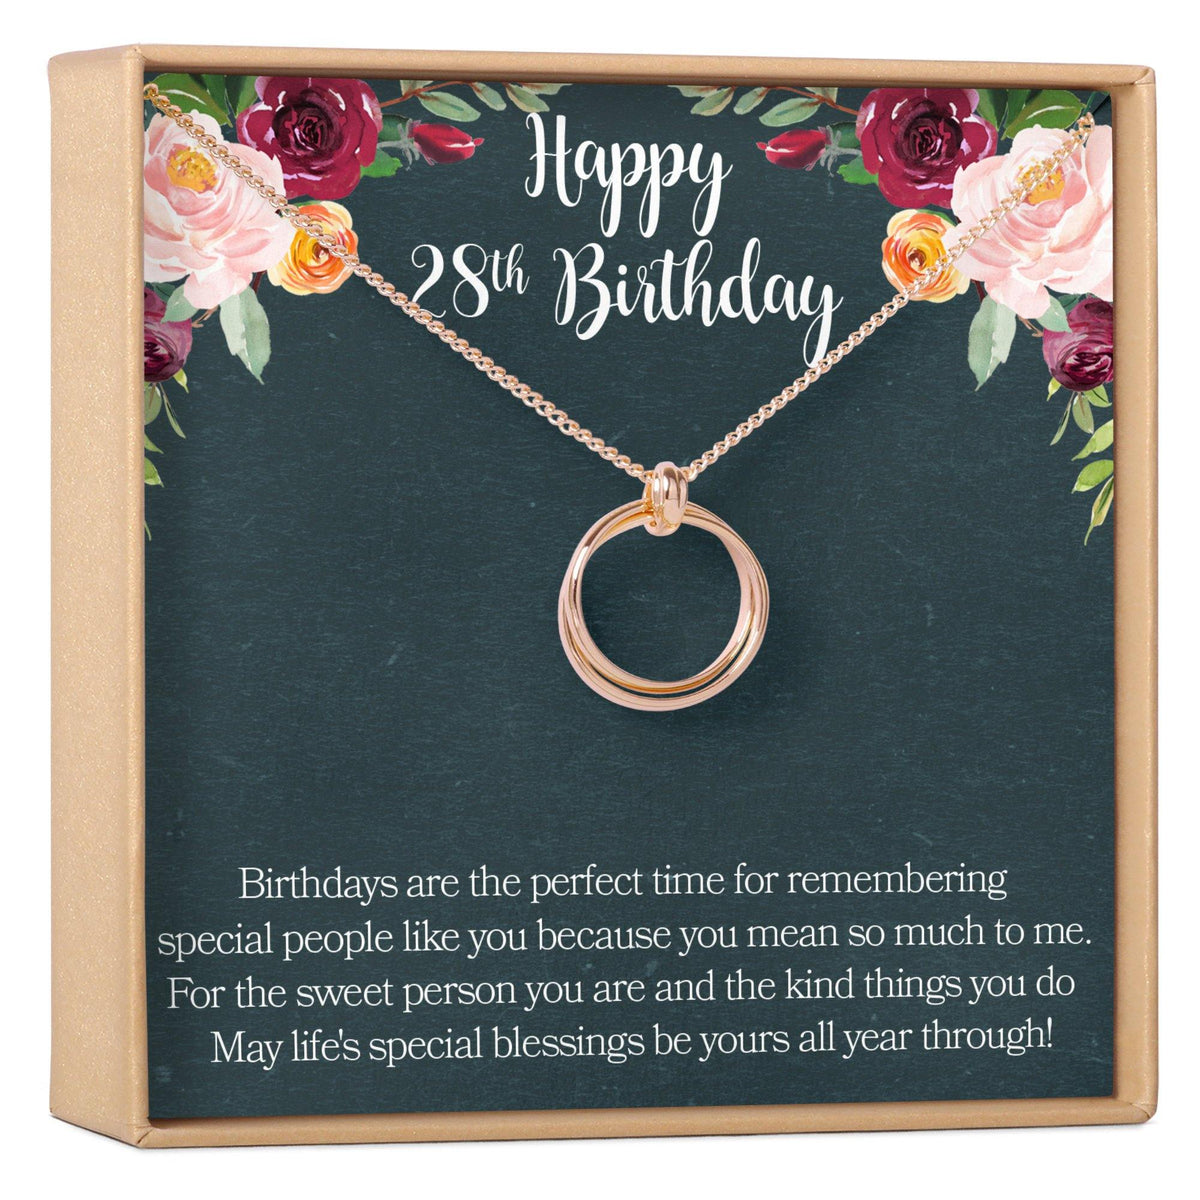 28th Birthday Necklace - Dear Ava, Jewelry / Necklaces / Pendants